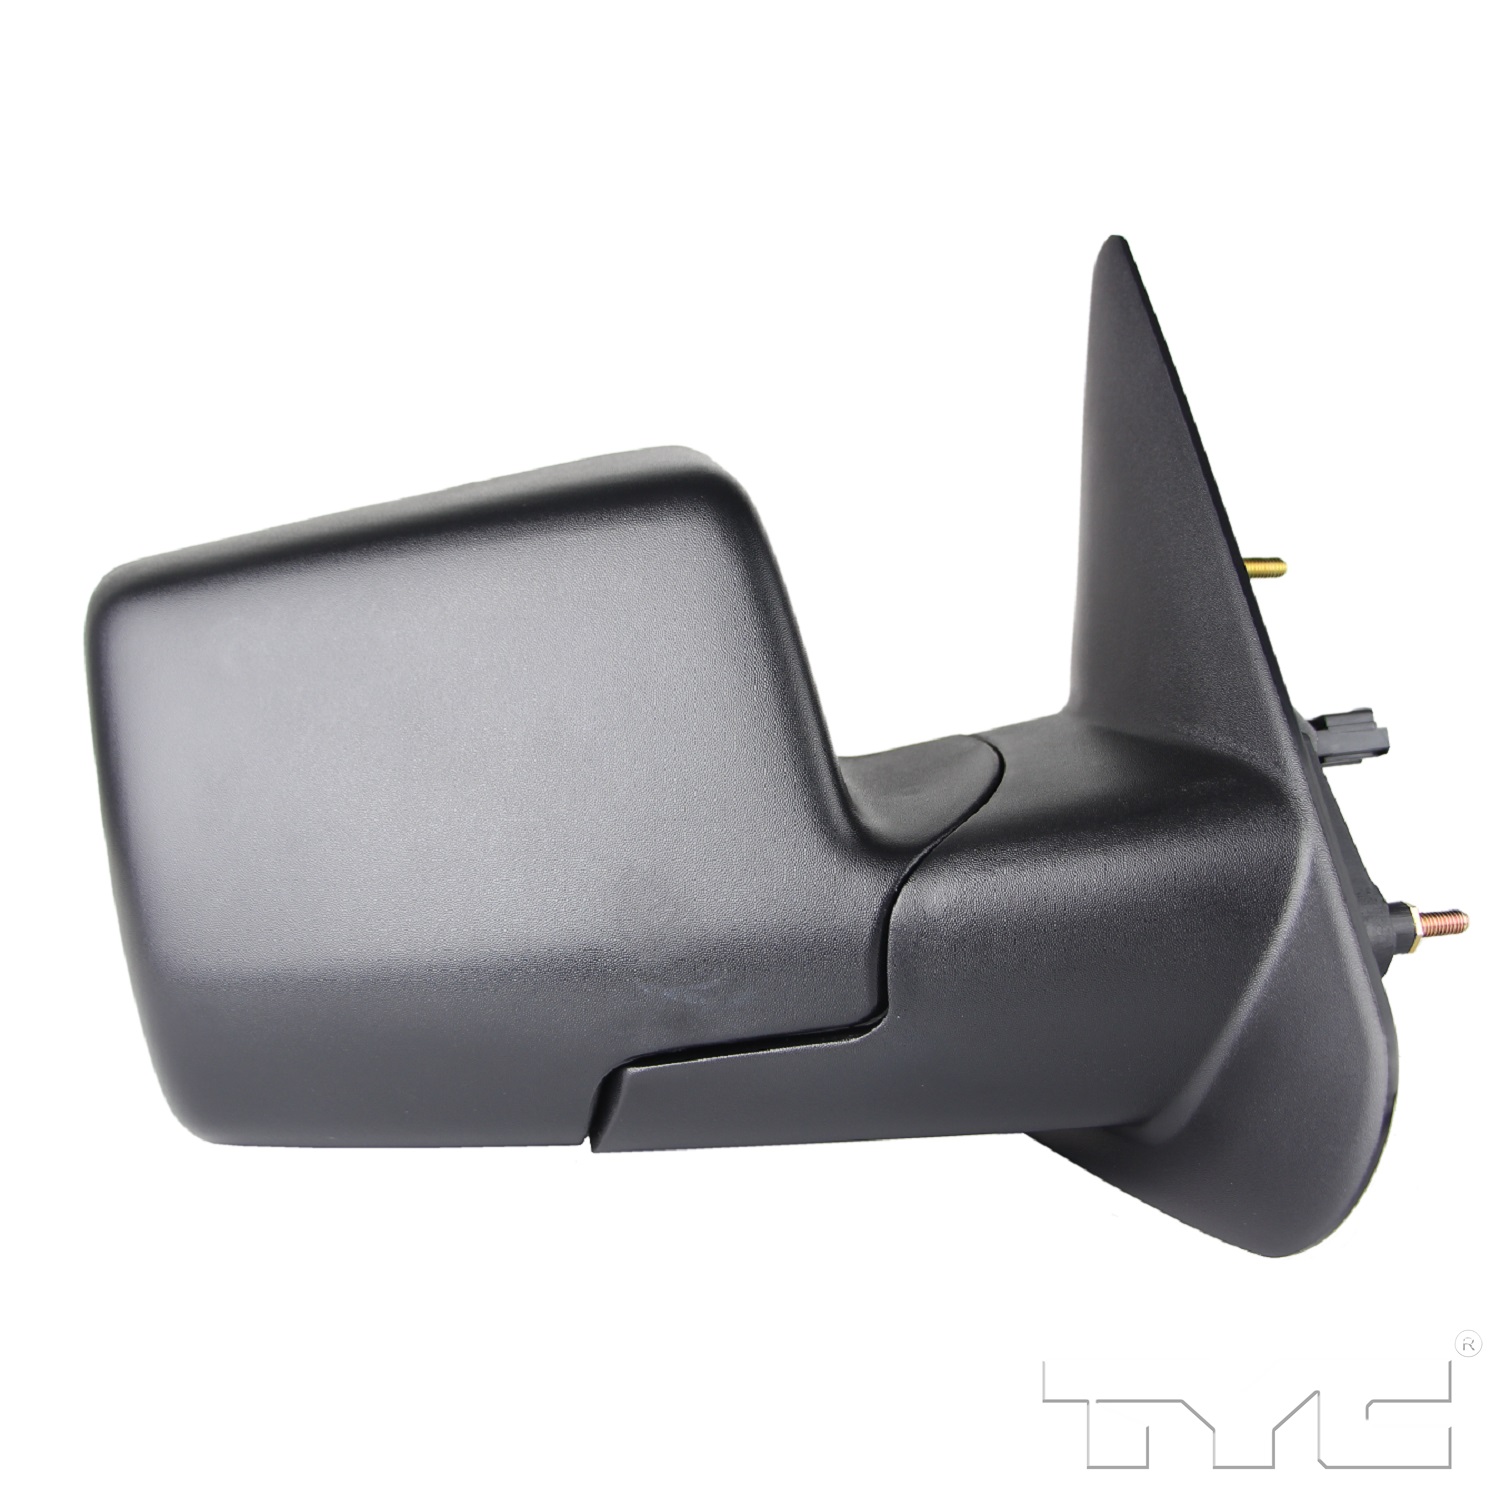 Aftermarket MIRRORS for MAZDA - B4000, B4000,06-07,RT Mirror outside rear view